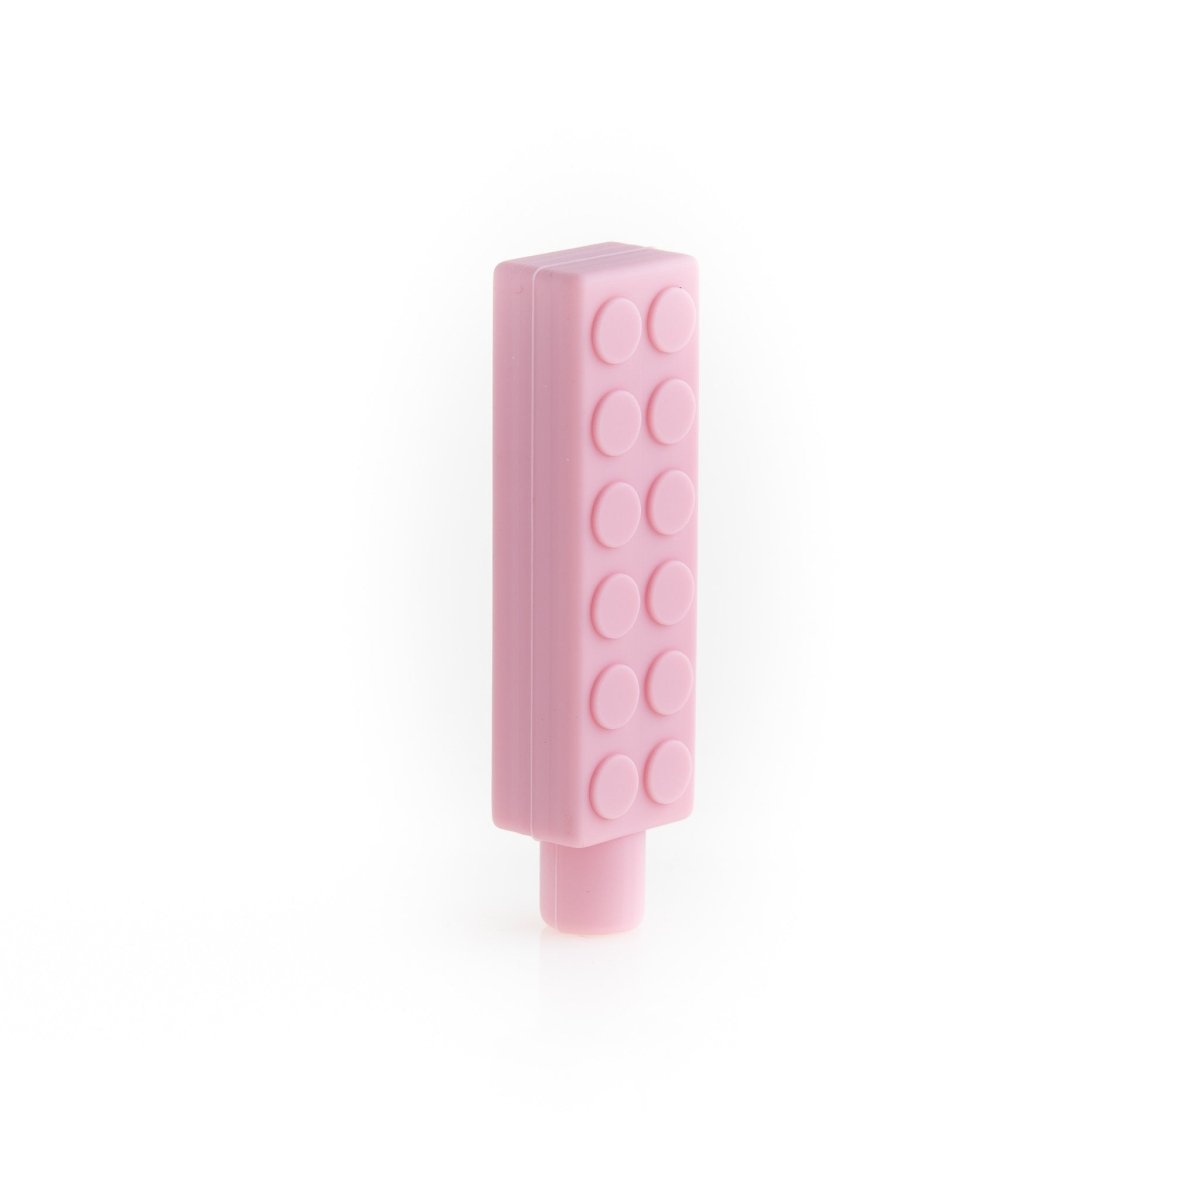 Silicone Teethers and Pendants Chewable Pencil Topper Soft Pink from Cara & Co Craft Supply